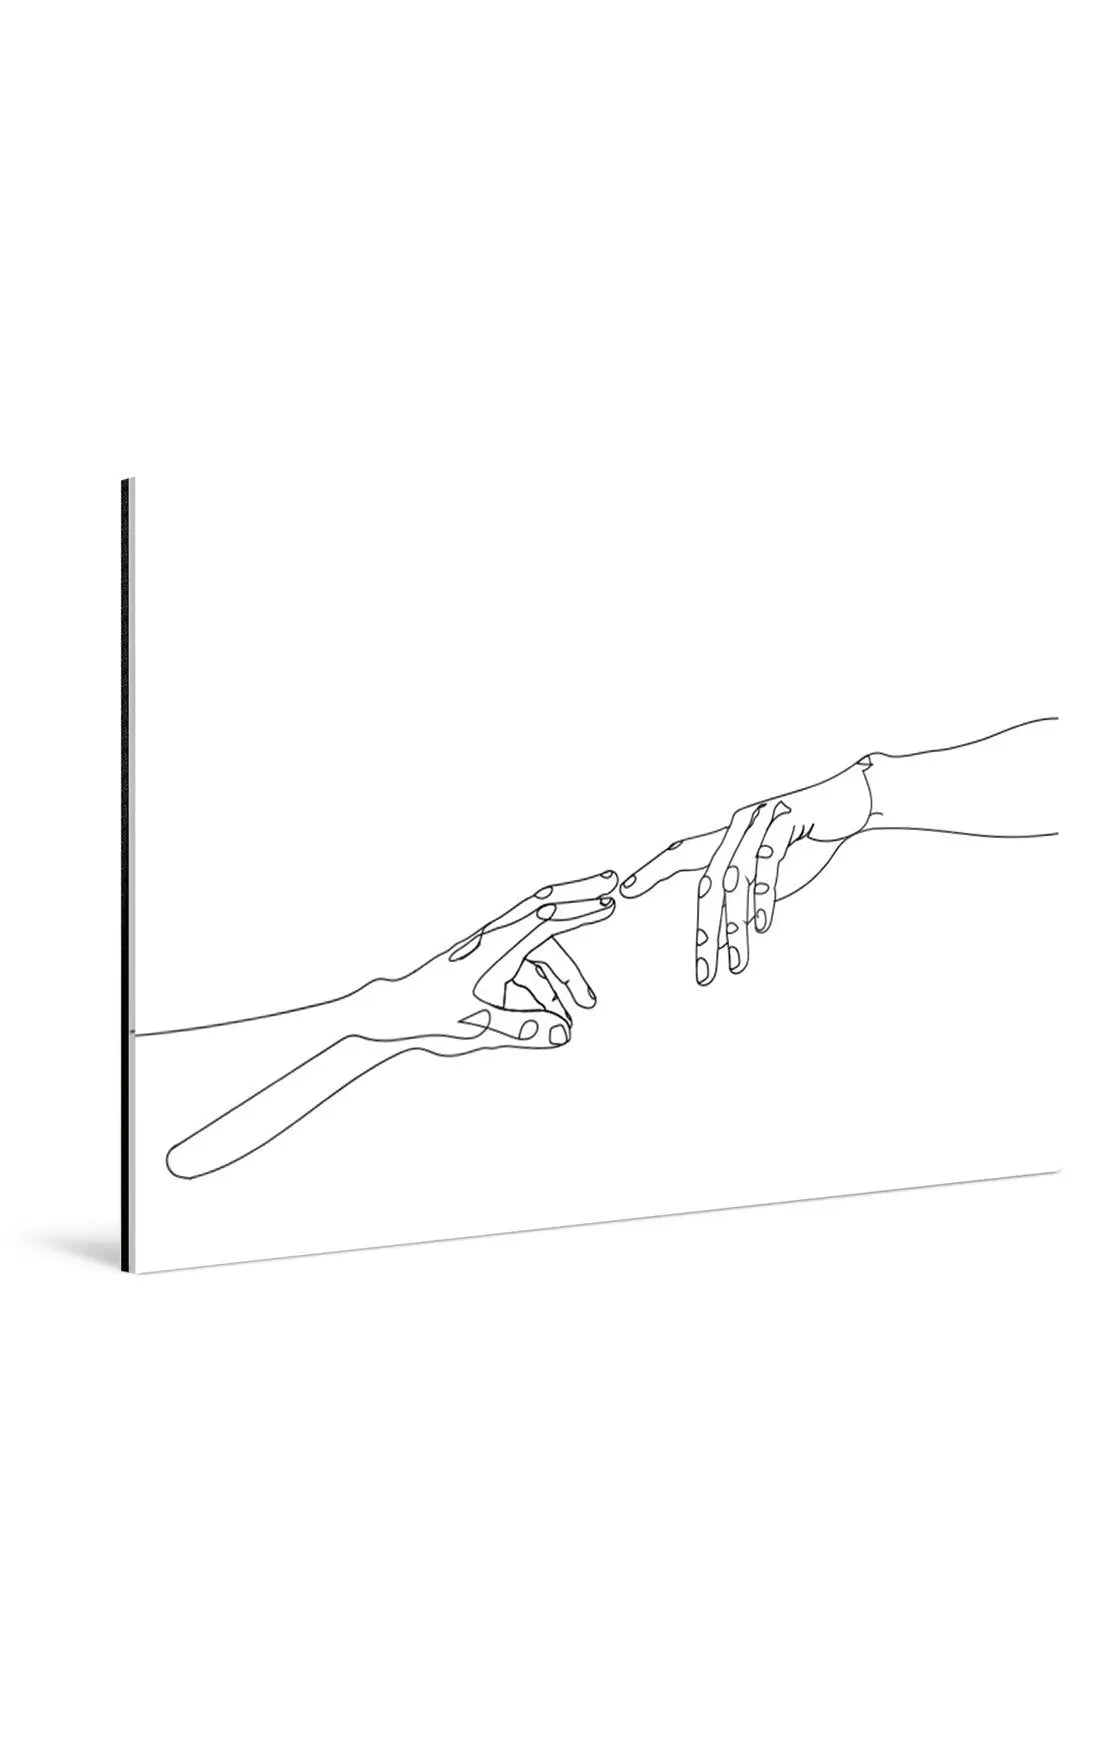 "HANDS" - Art For Everyone